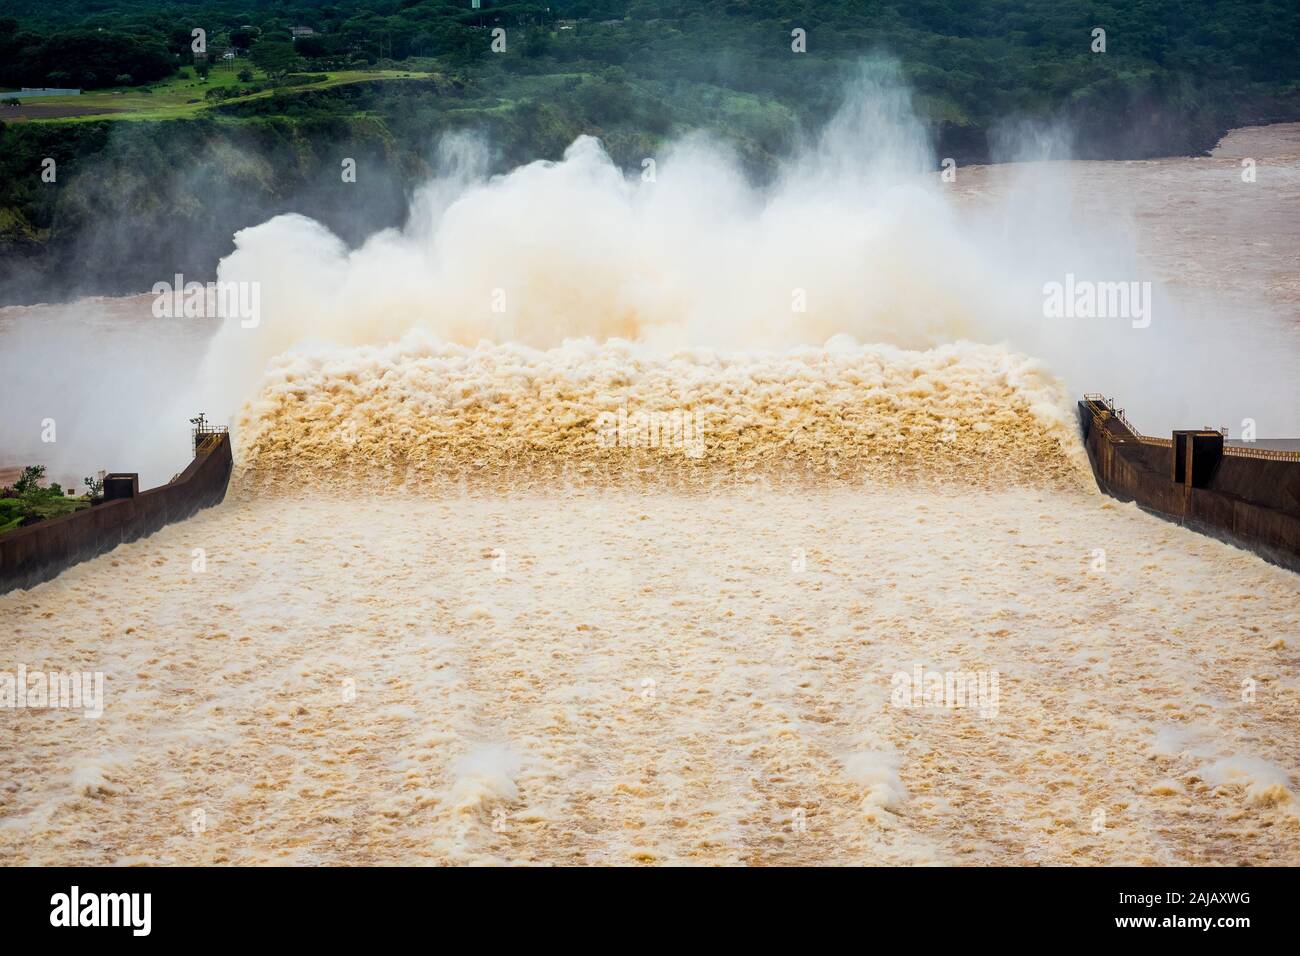 Water spillway at Itaipu Dam on the border of Brazil and Paraguay. Stock Photo